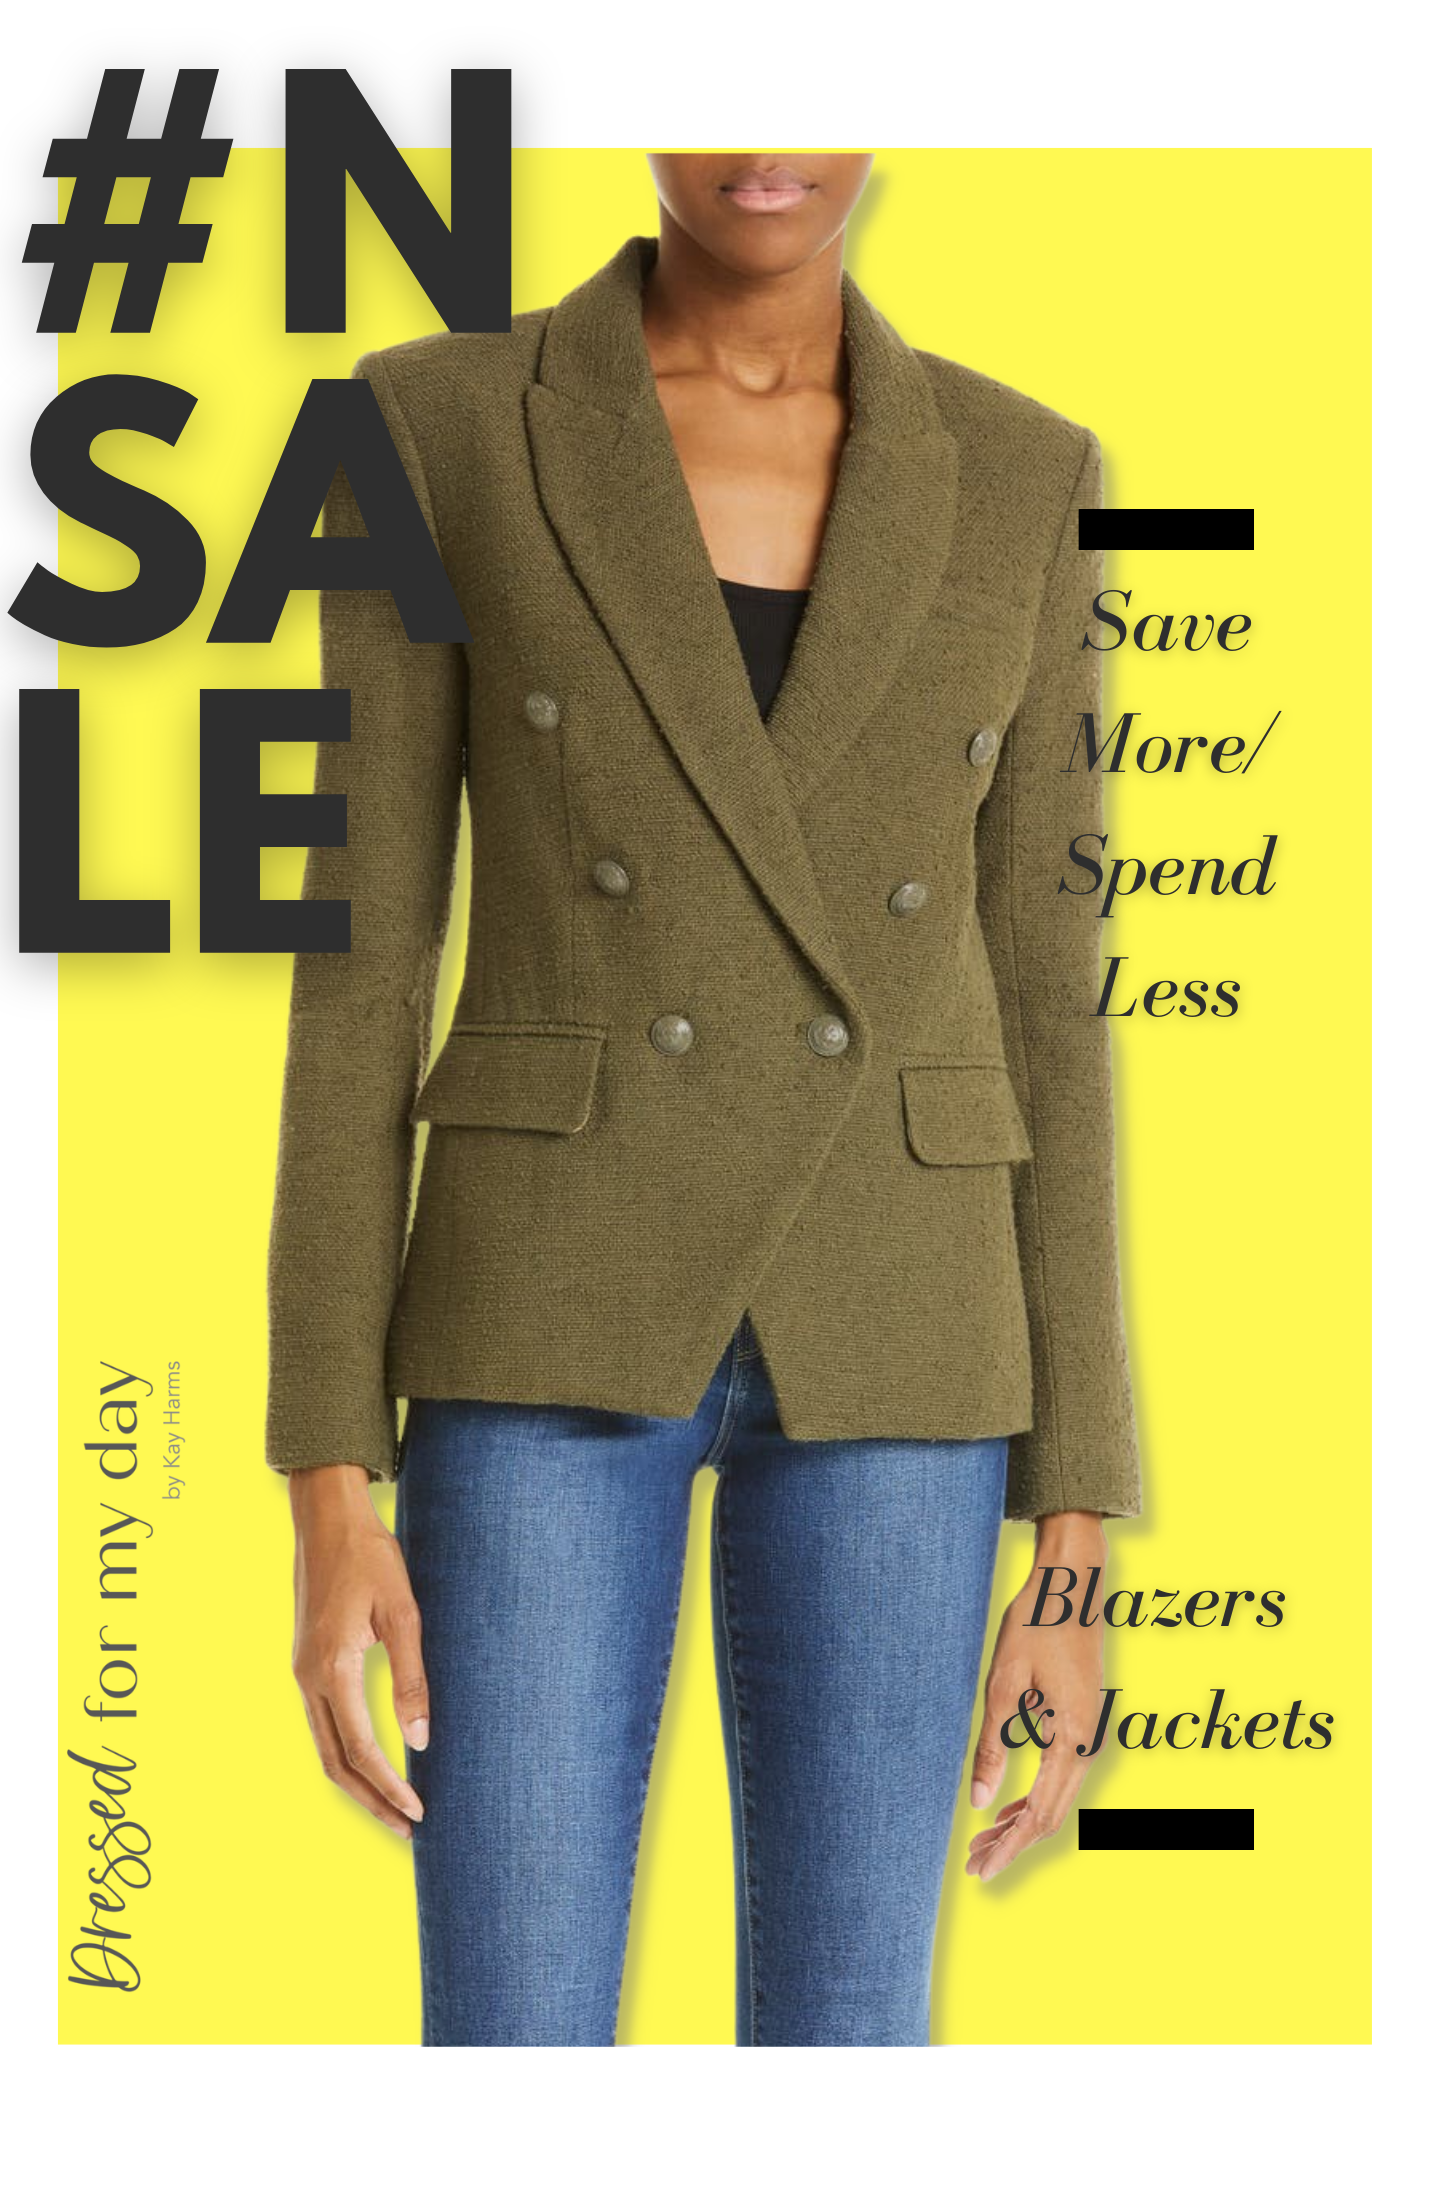 Save More Spend Less on Blazers & Jacket in the NSale